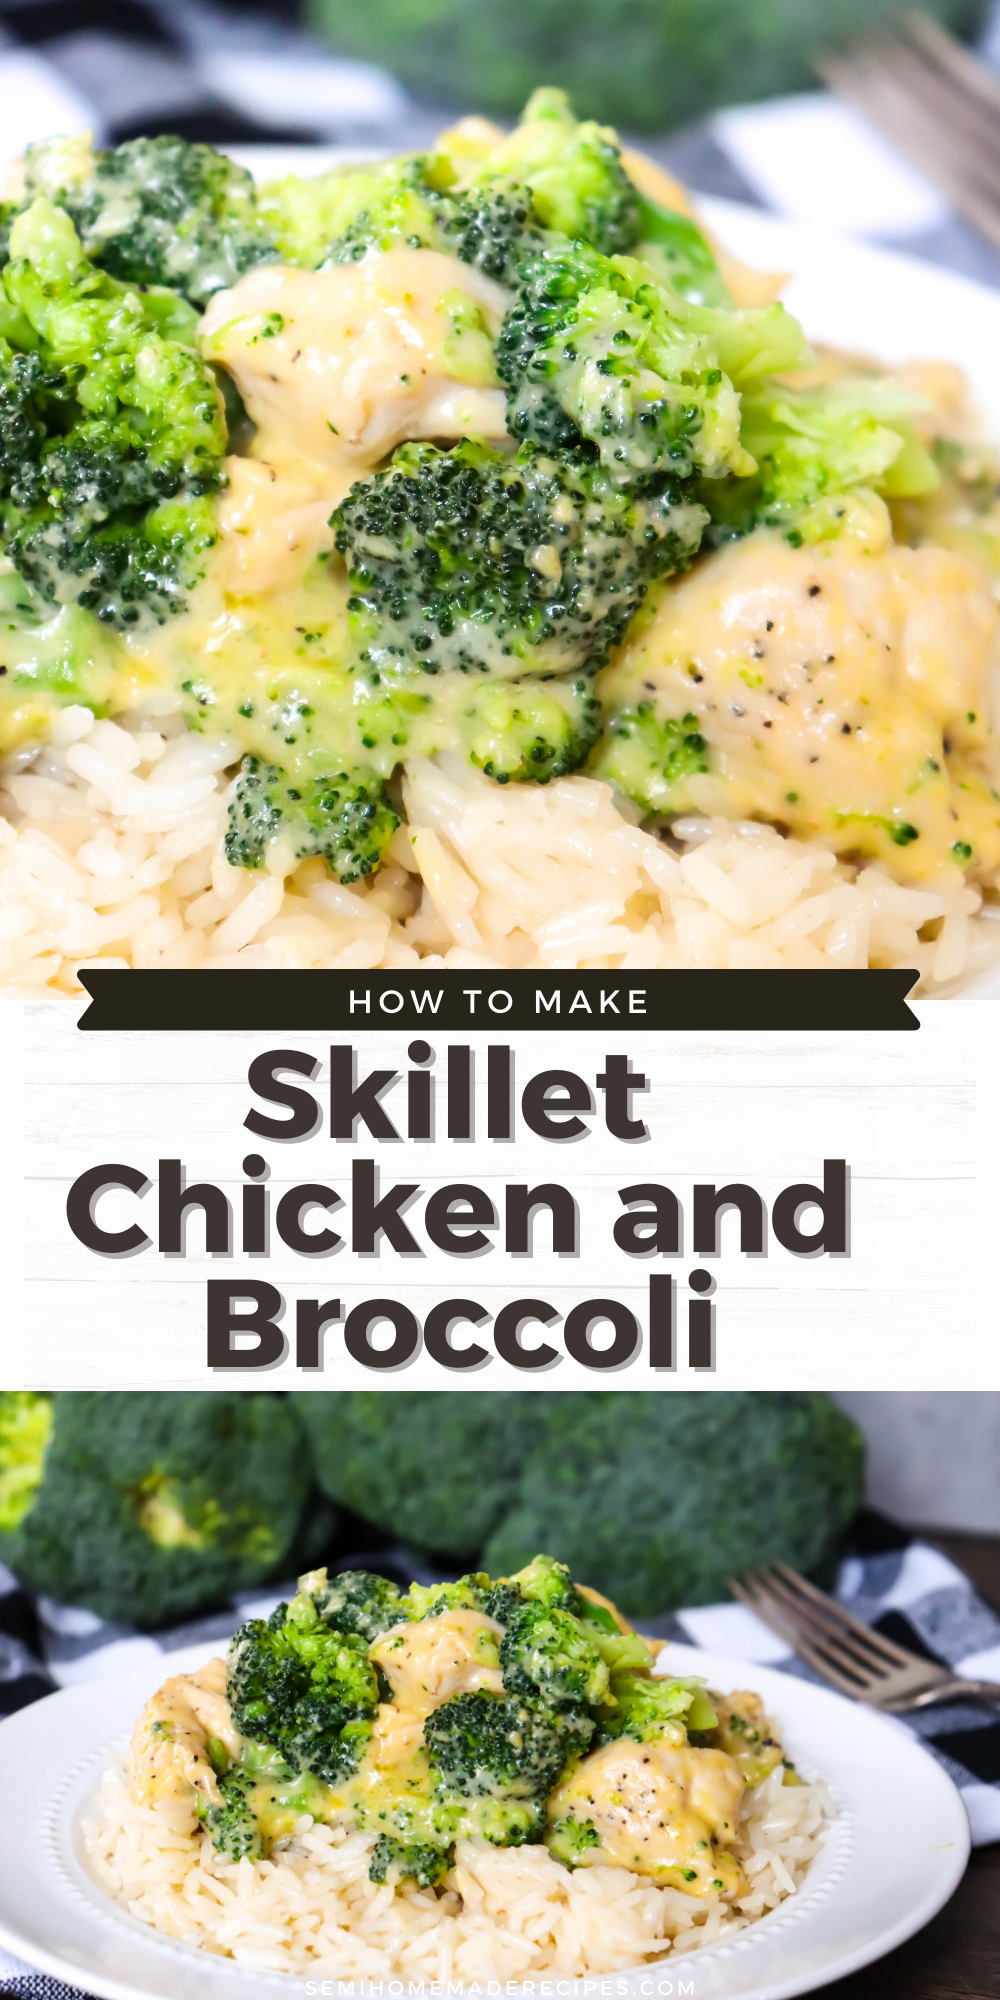 Chicken, Cheese, broccoli and about 30 minutes make up this vintage skillet recipes that's great for an easy and quick dinner. This skillet meal can be served over rice or pasta or with a side dish for a complete meal! 